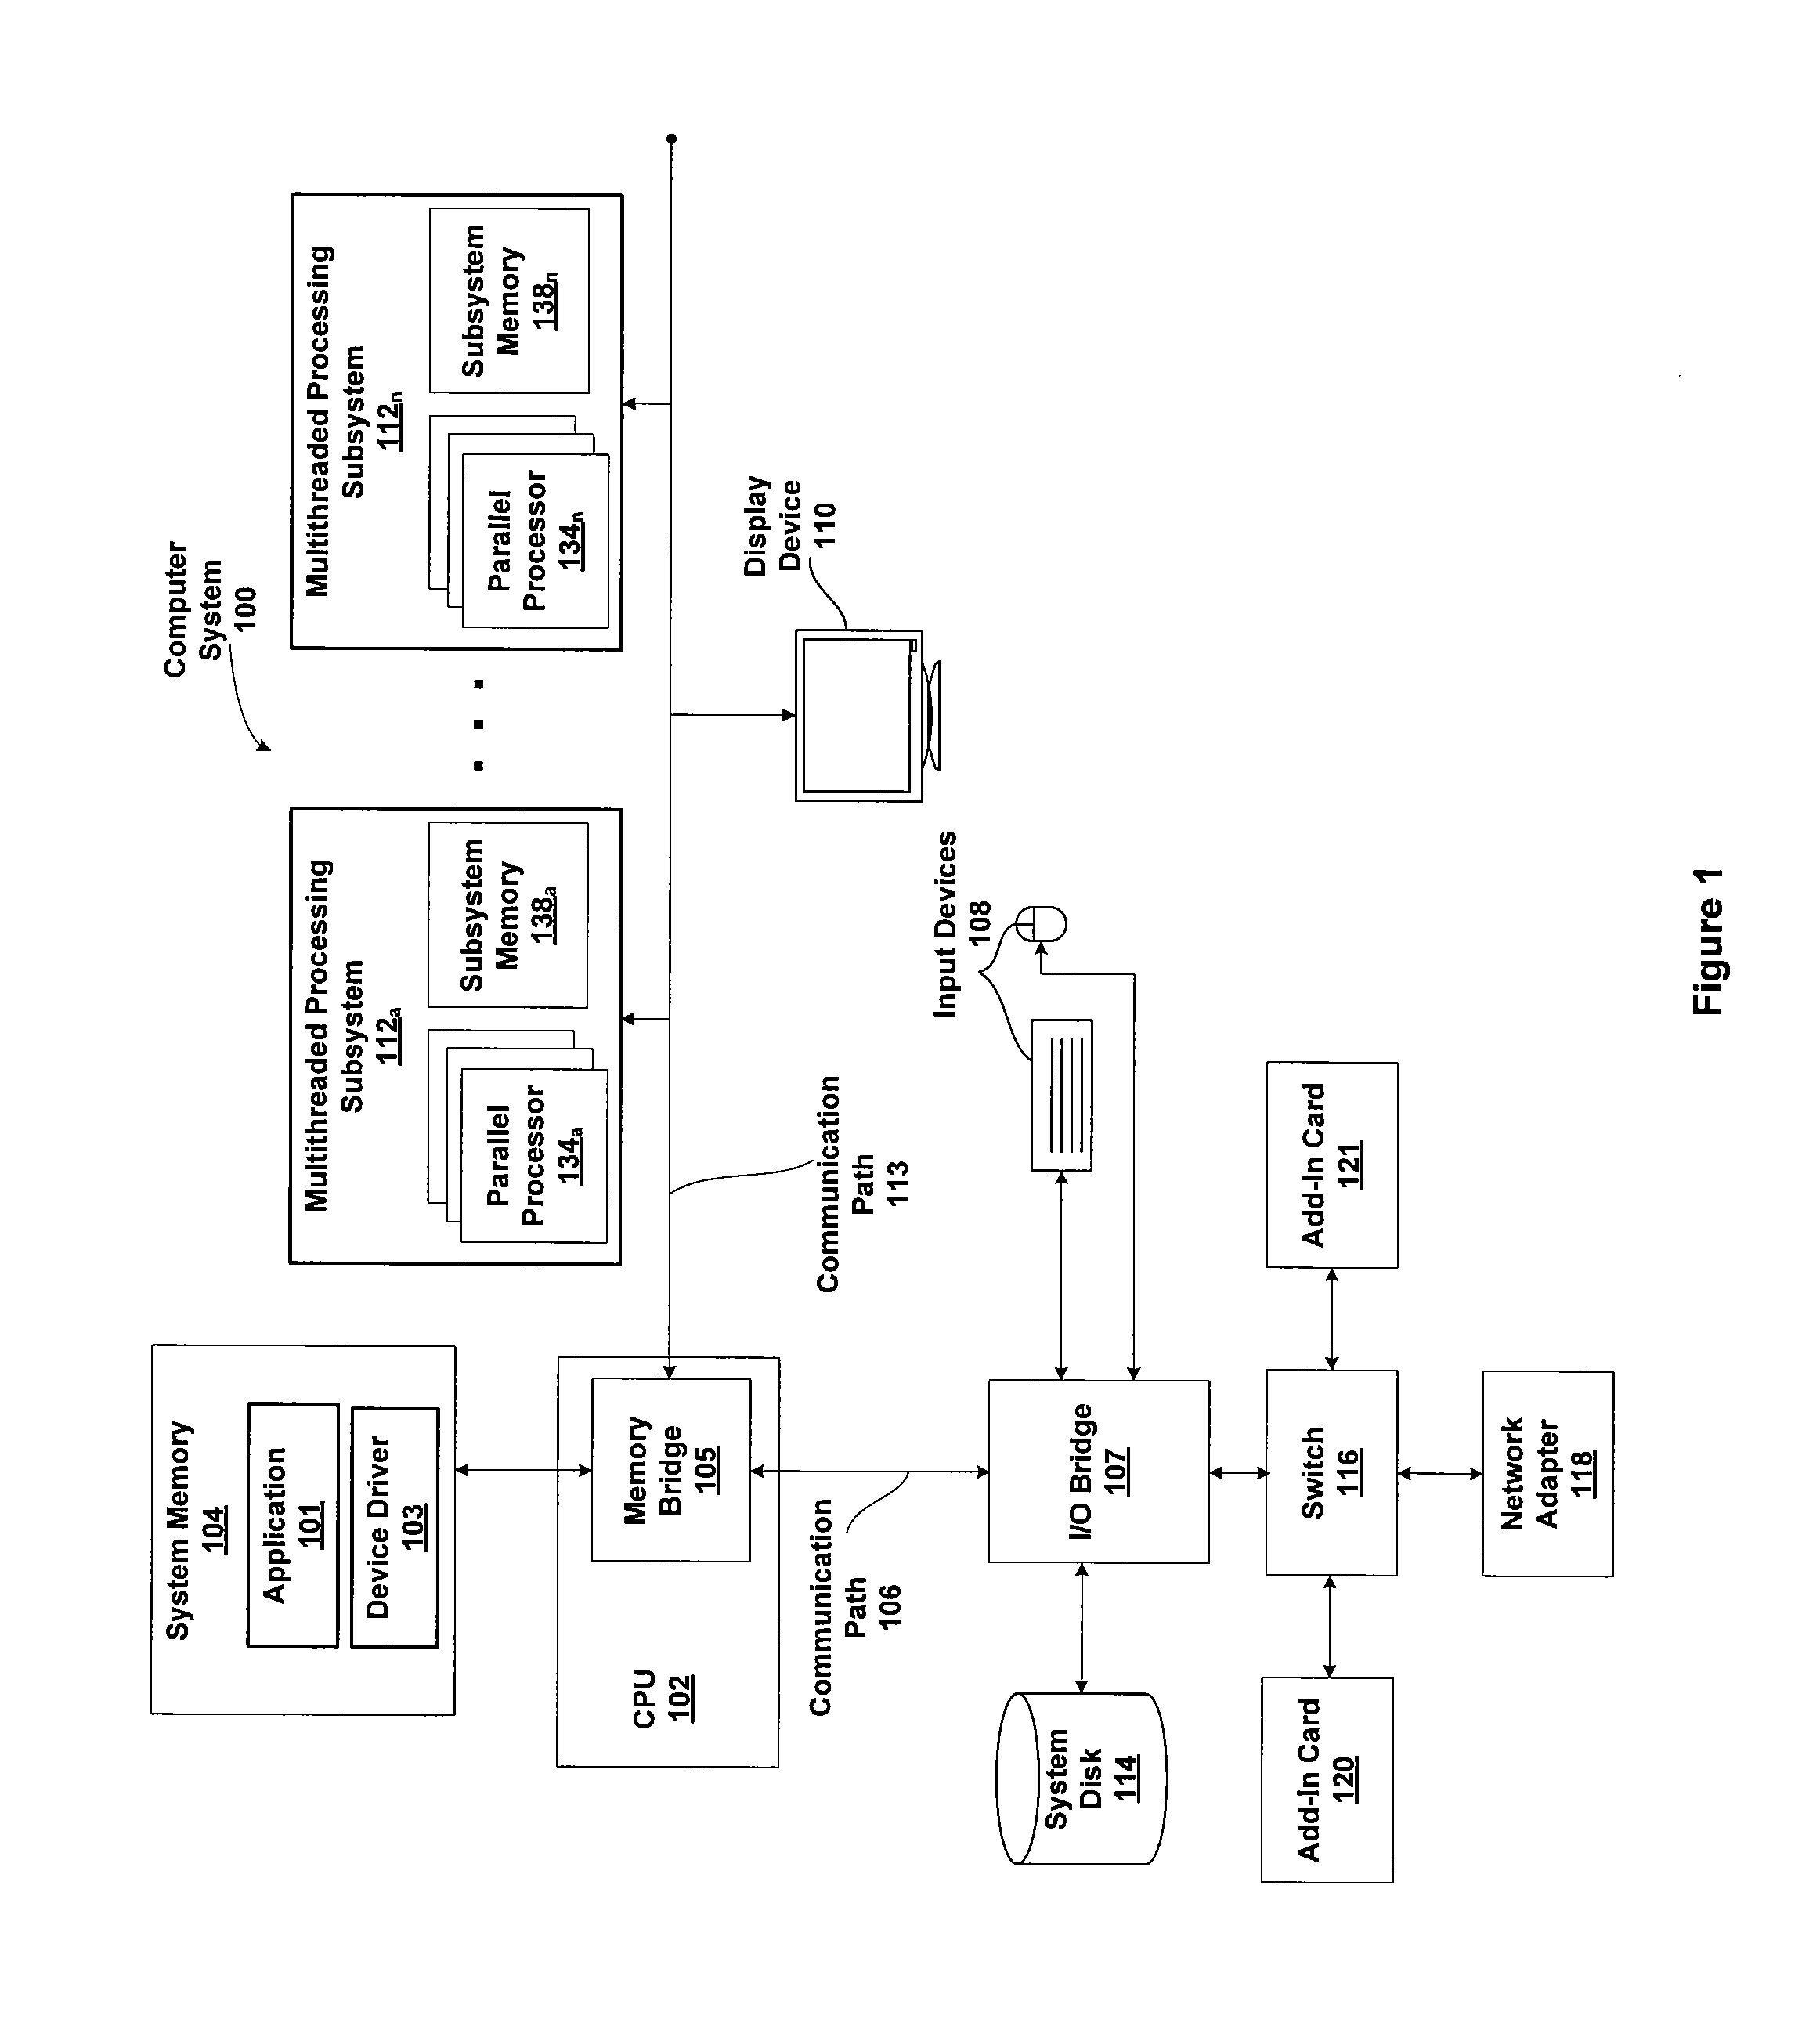 Method and system for providing shared memory access to graphics processing unit processes